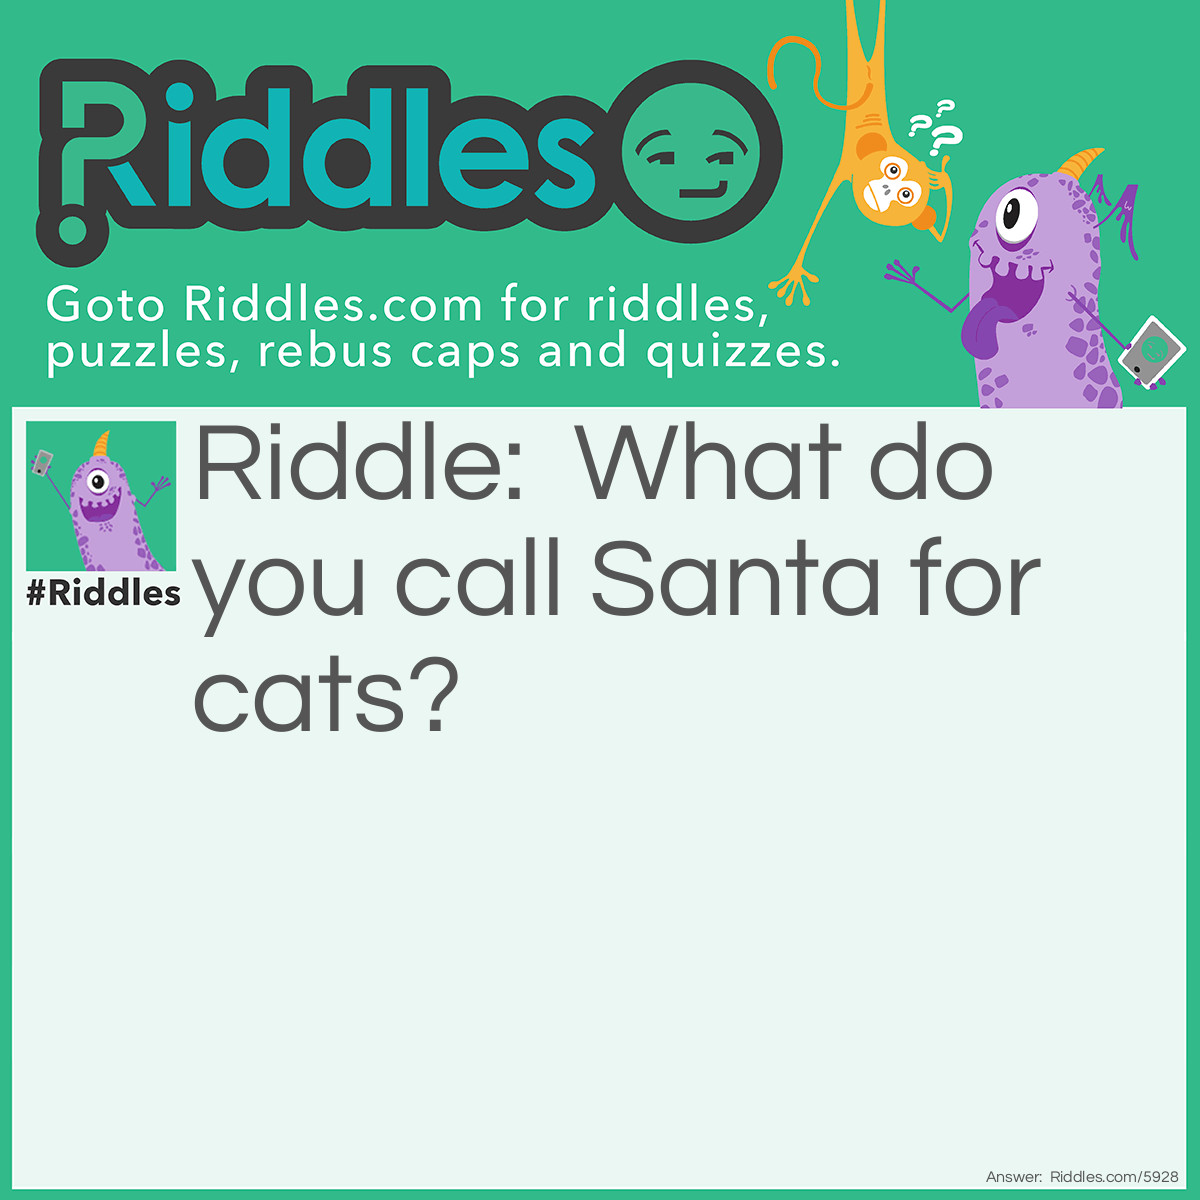 Riddle: What do you call santa for cats? Answer: Santa paws.